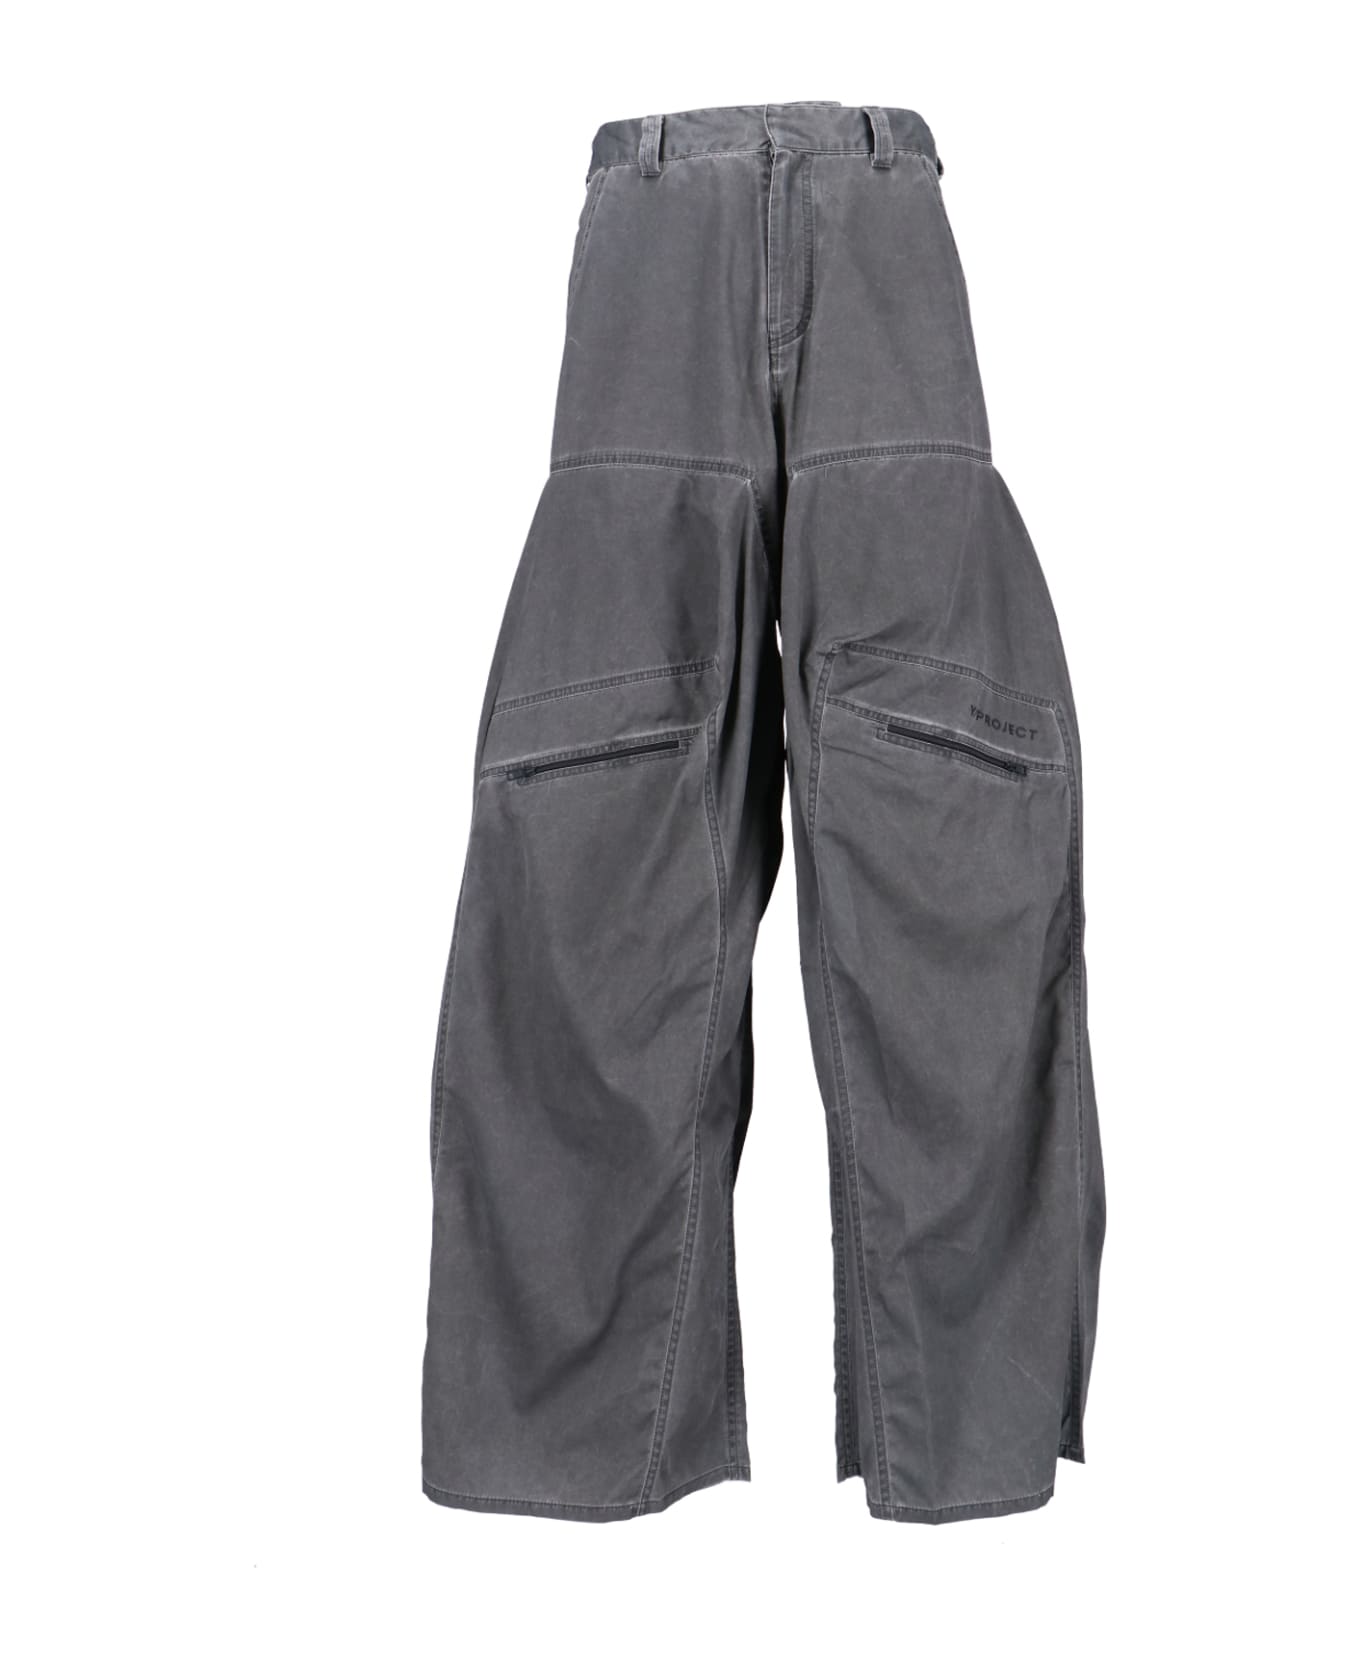 Y/Project Cargo Pants - Black   name:467